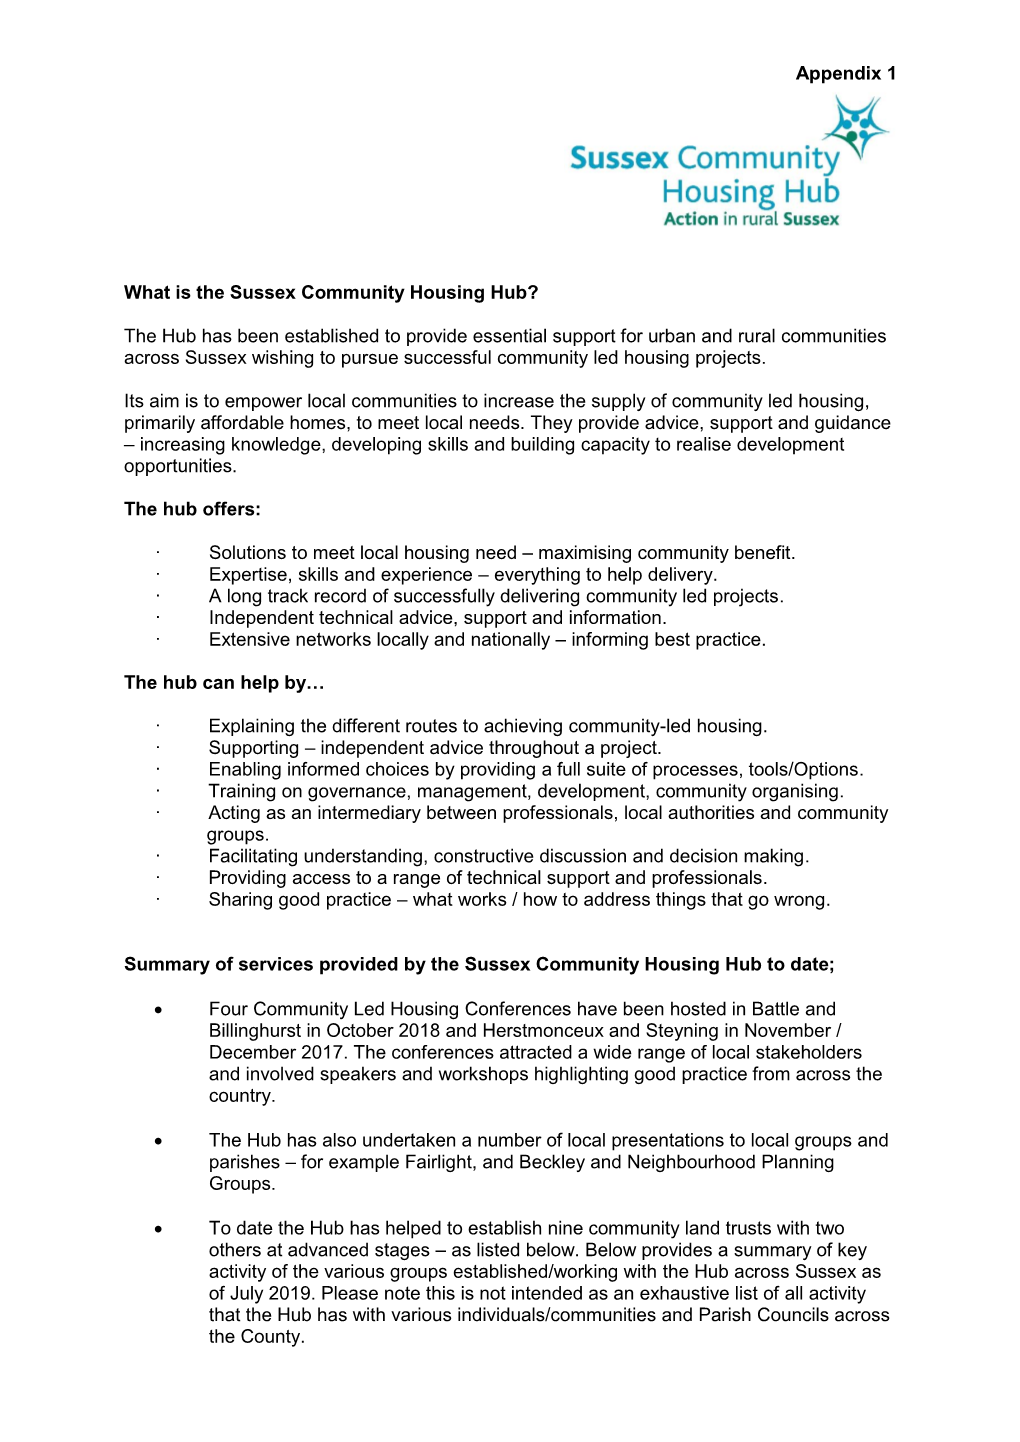 Appendix 1 What Is the Sussex Community Housing Hub?